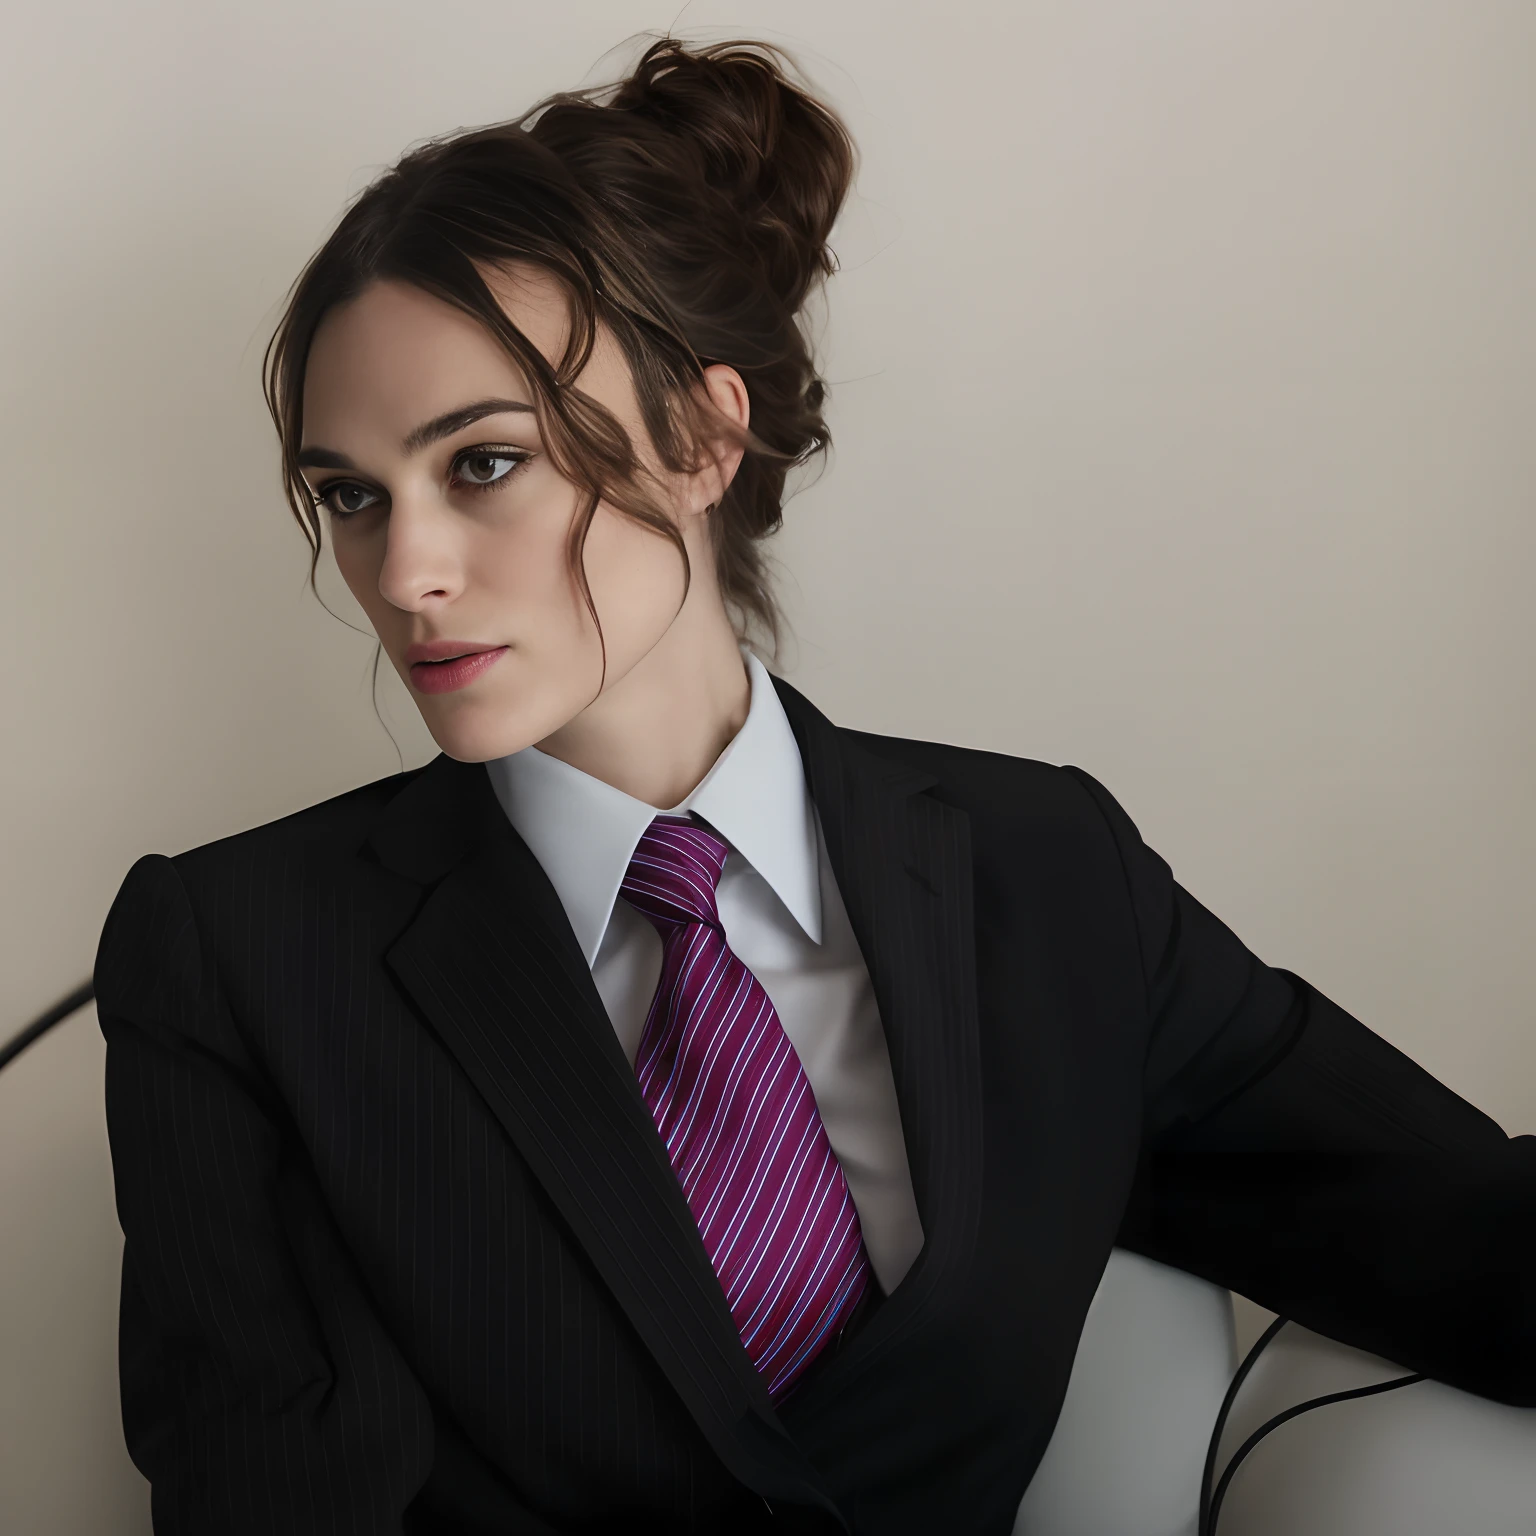 Keira Knightley in a suit and tie sitting on a chair, girl in a suit, girl in suit, wearing a strict business suit, in strict suit, woman in business suit, in a business suit, kiera knightly, woman in black business suit, kiera knightley, wearing business suit, wearing suit and tie, wearing a suit and tie